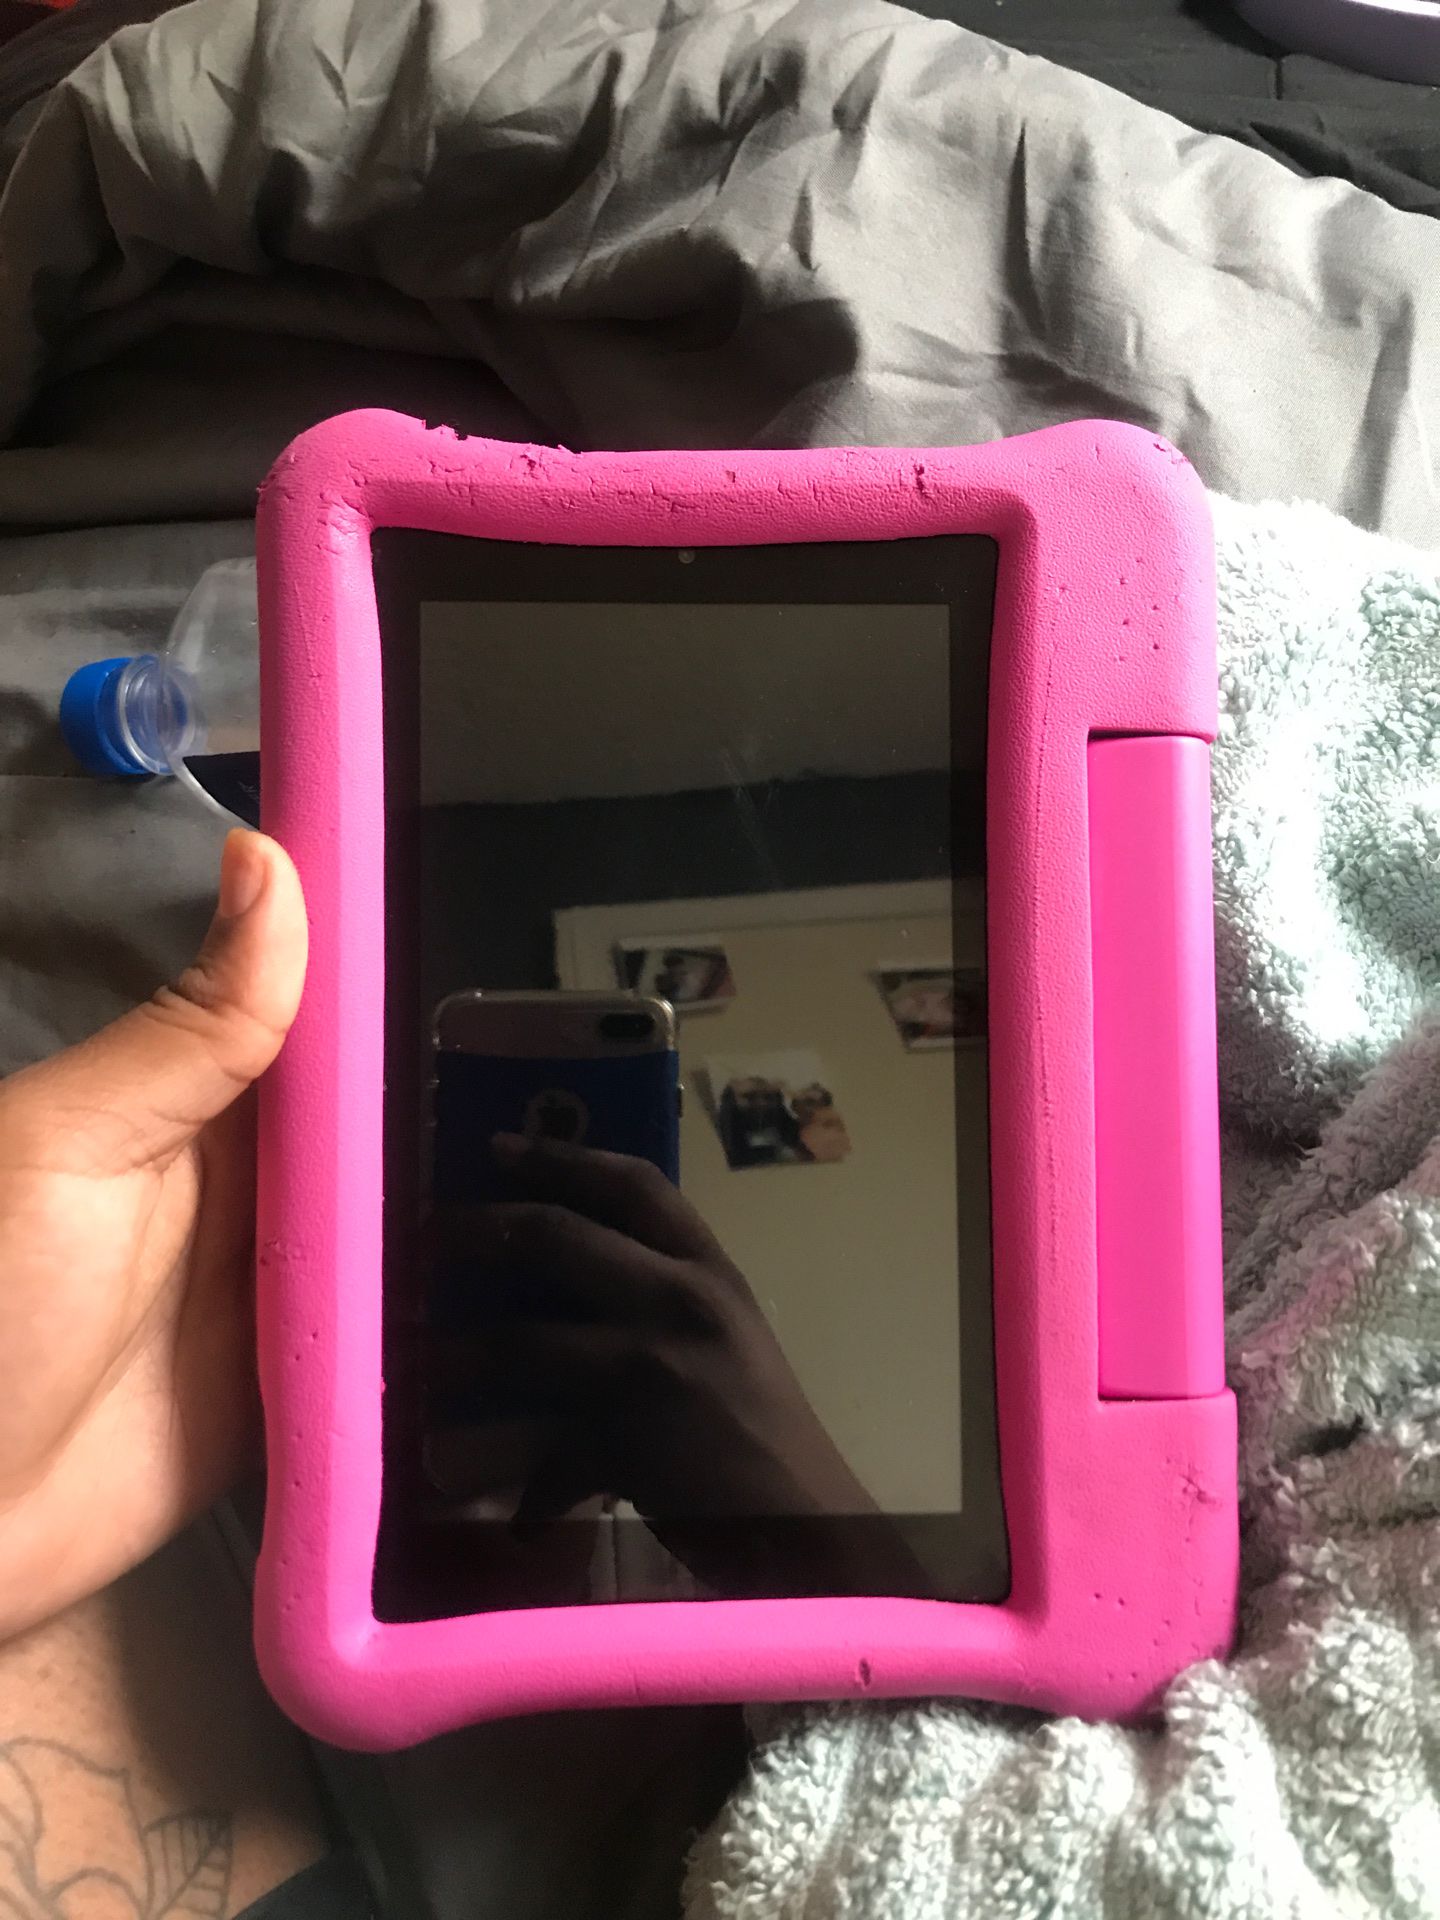 Amazon Fire Tablet $100 or best offer